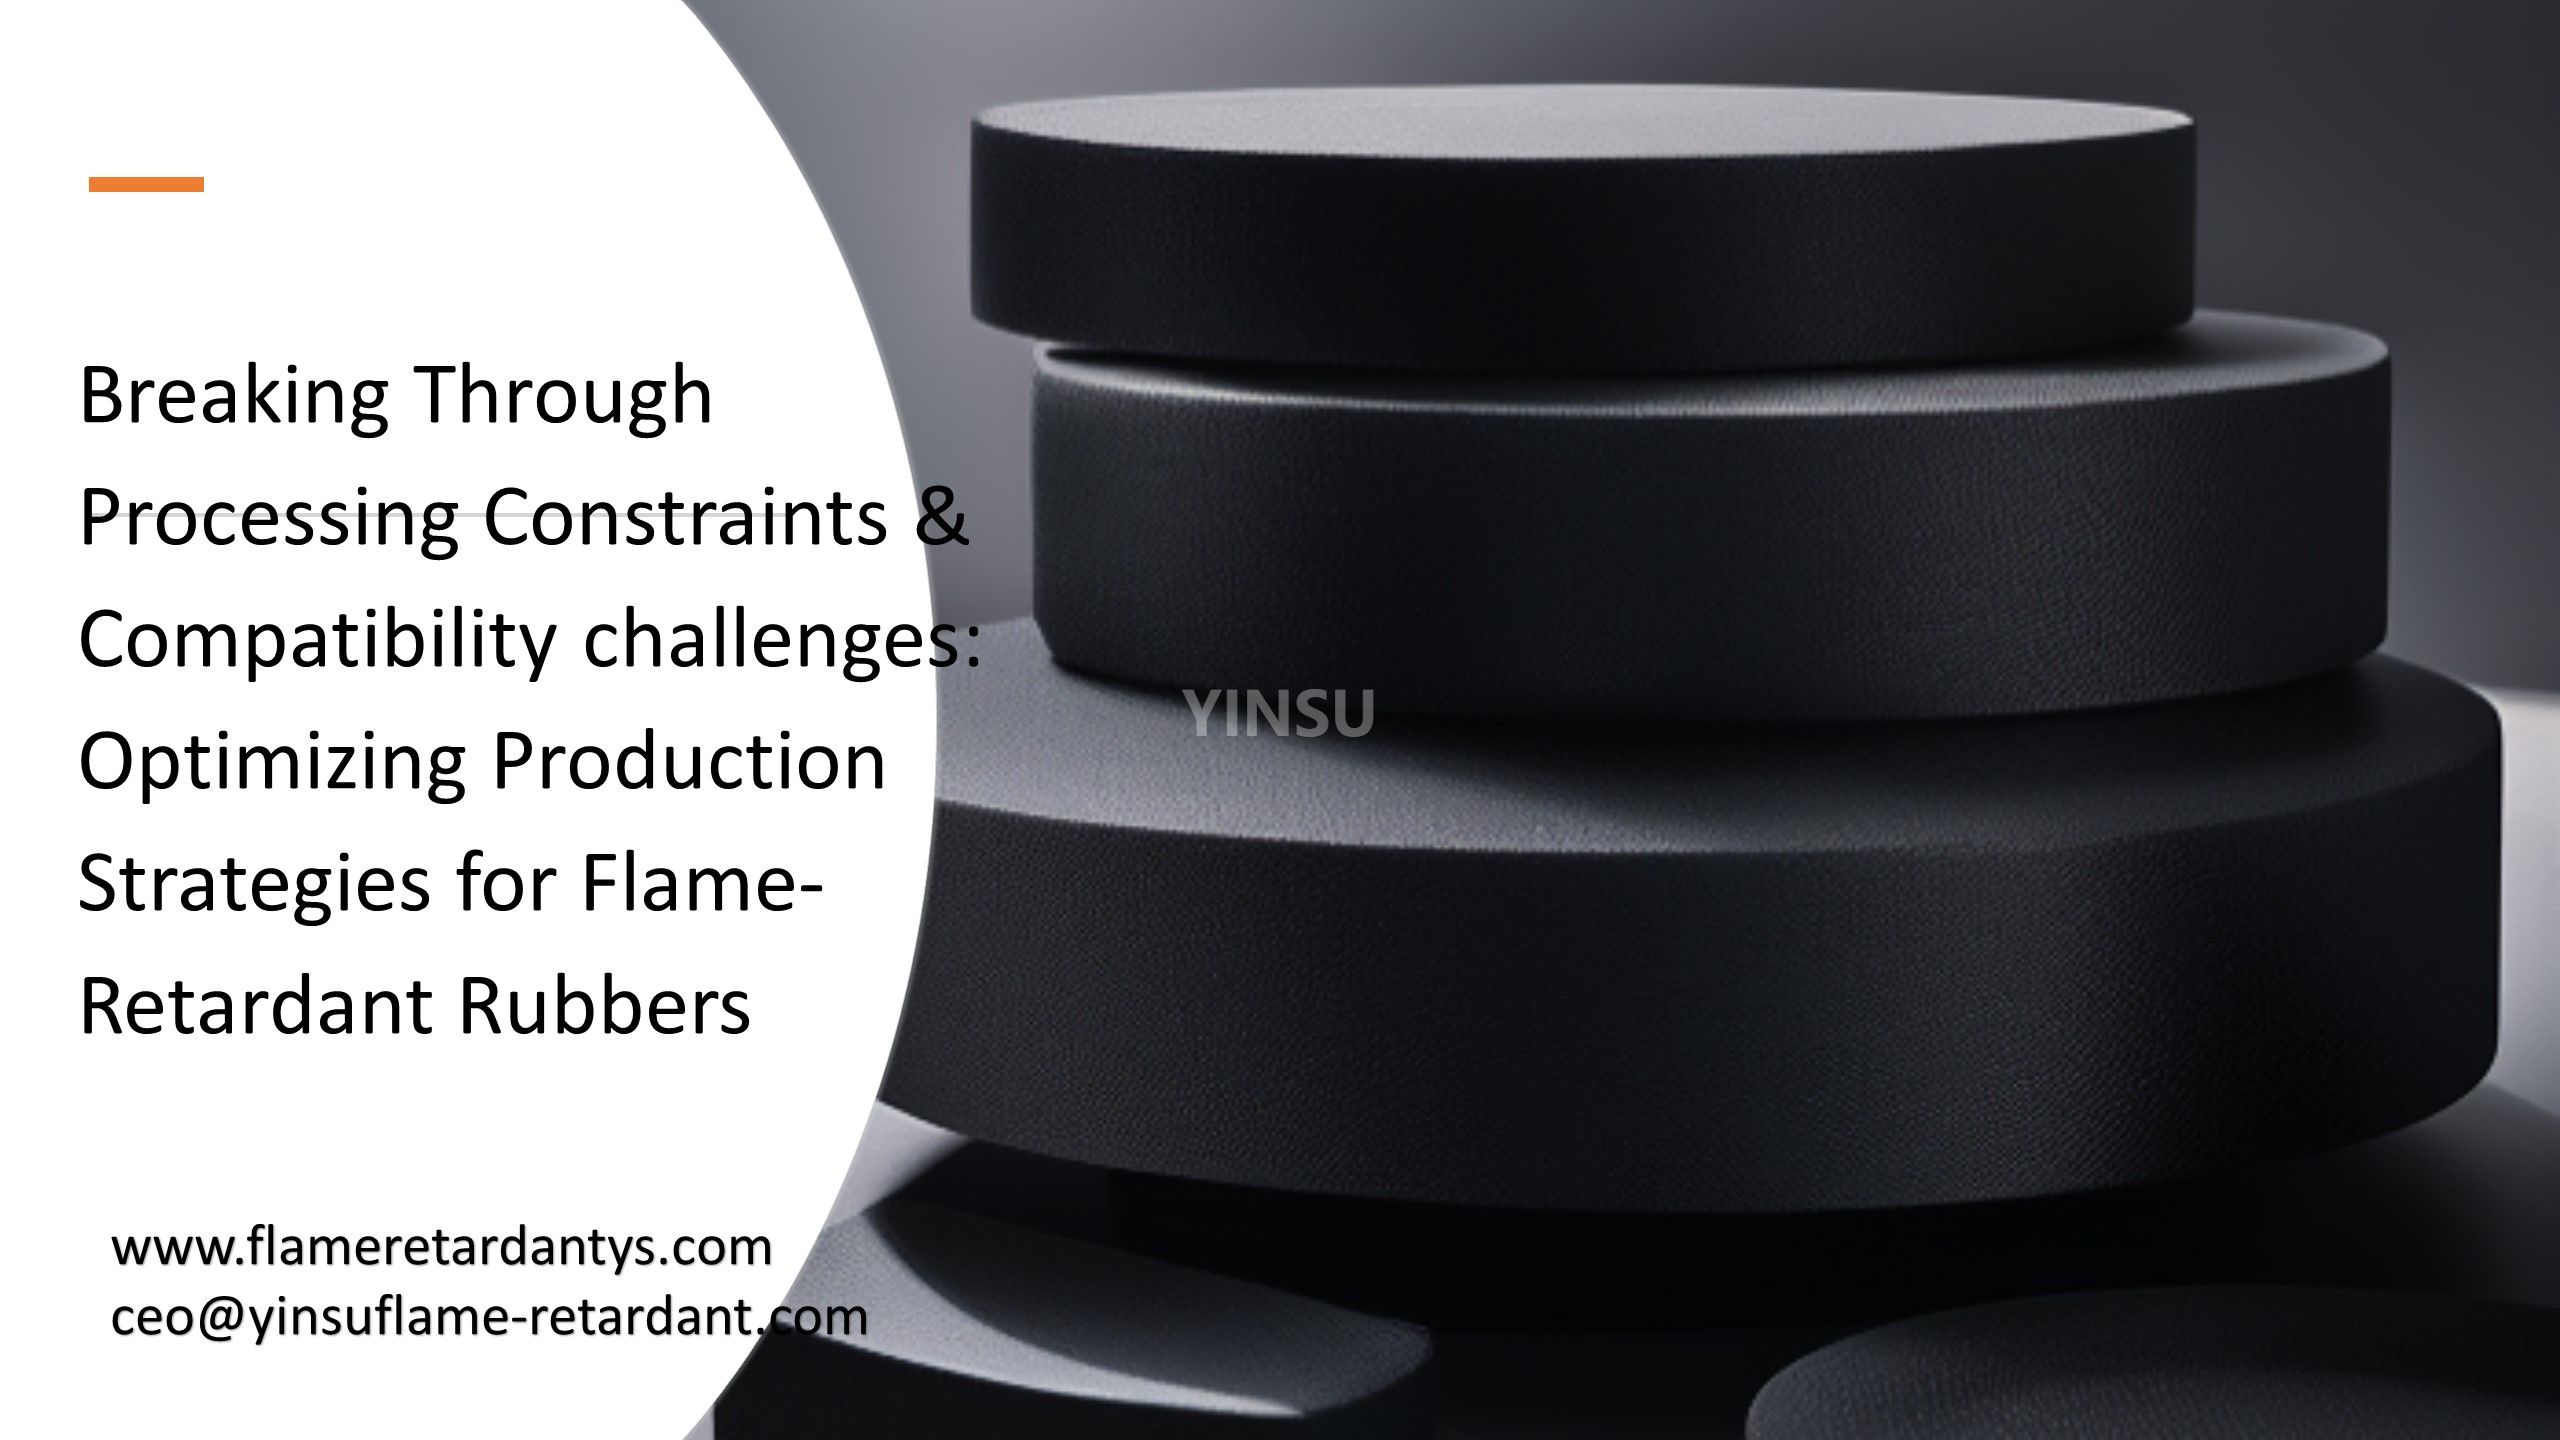 Breaking Through Processing Constraints And Compatibility Challenges: Optimizing Production Strategies for Flame-retardant Rubbers